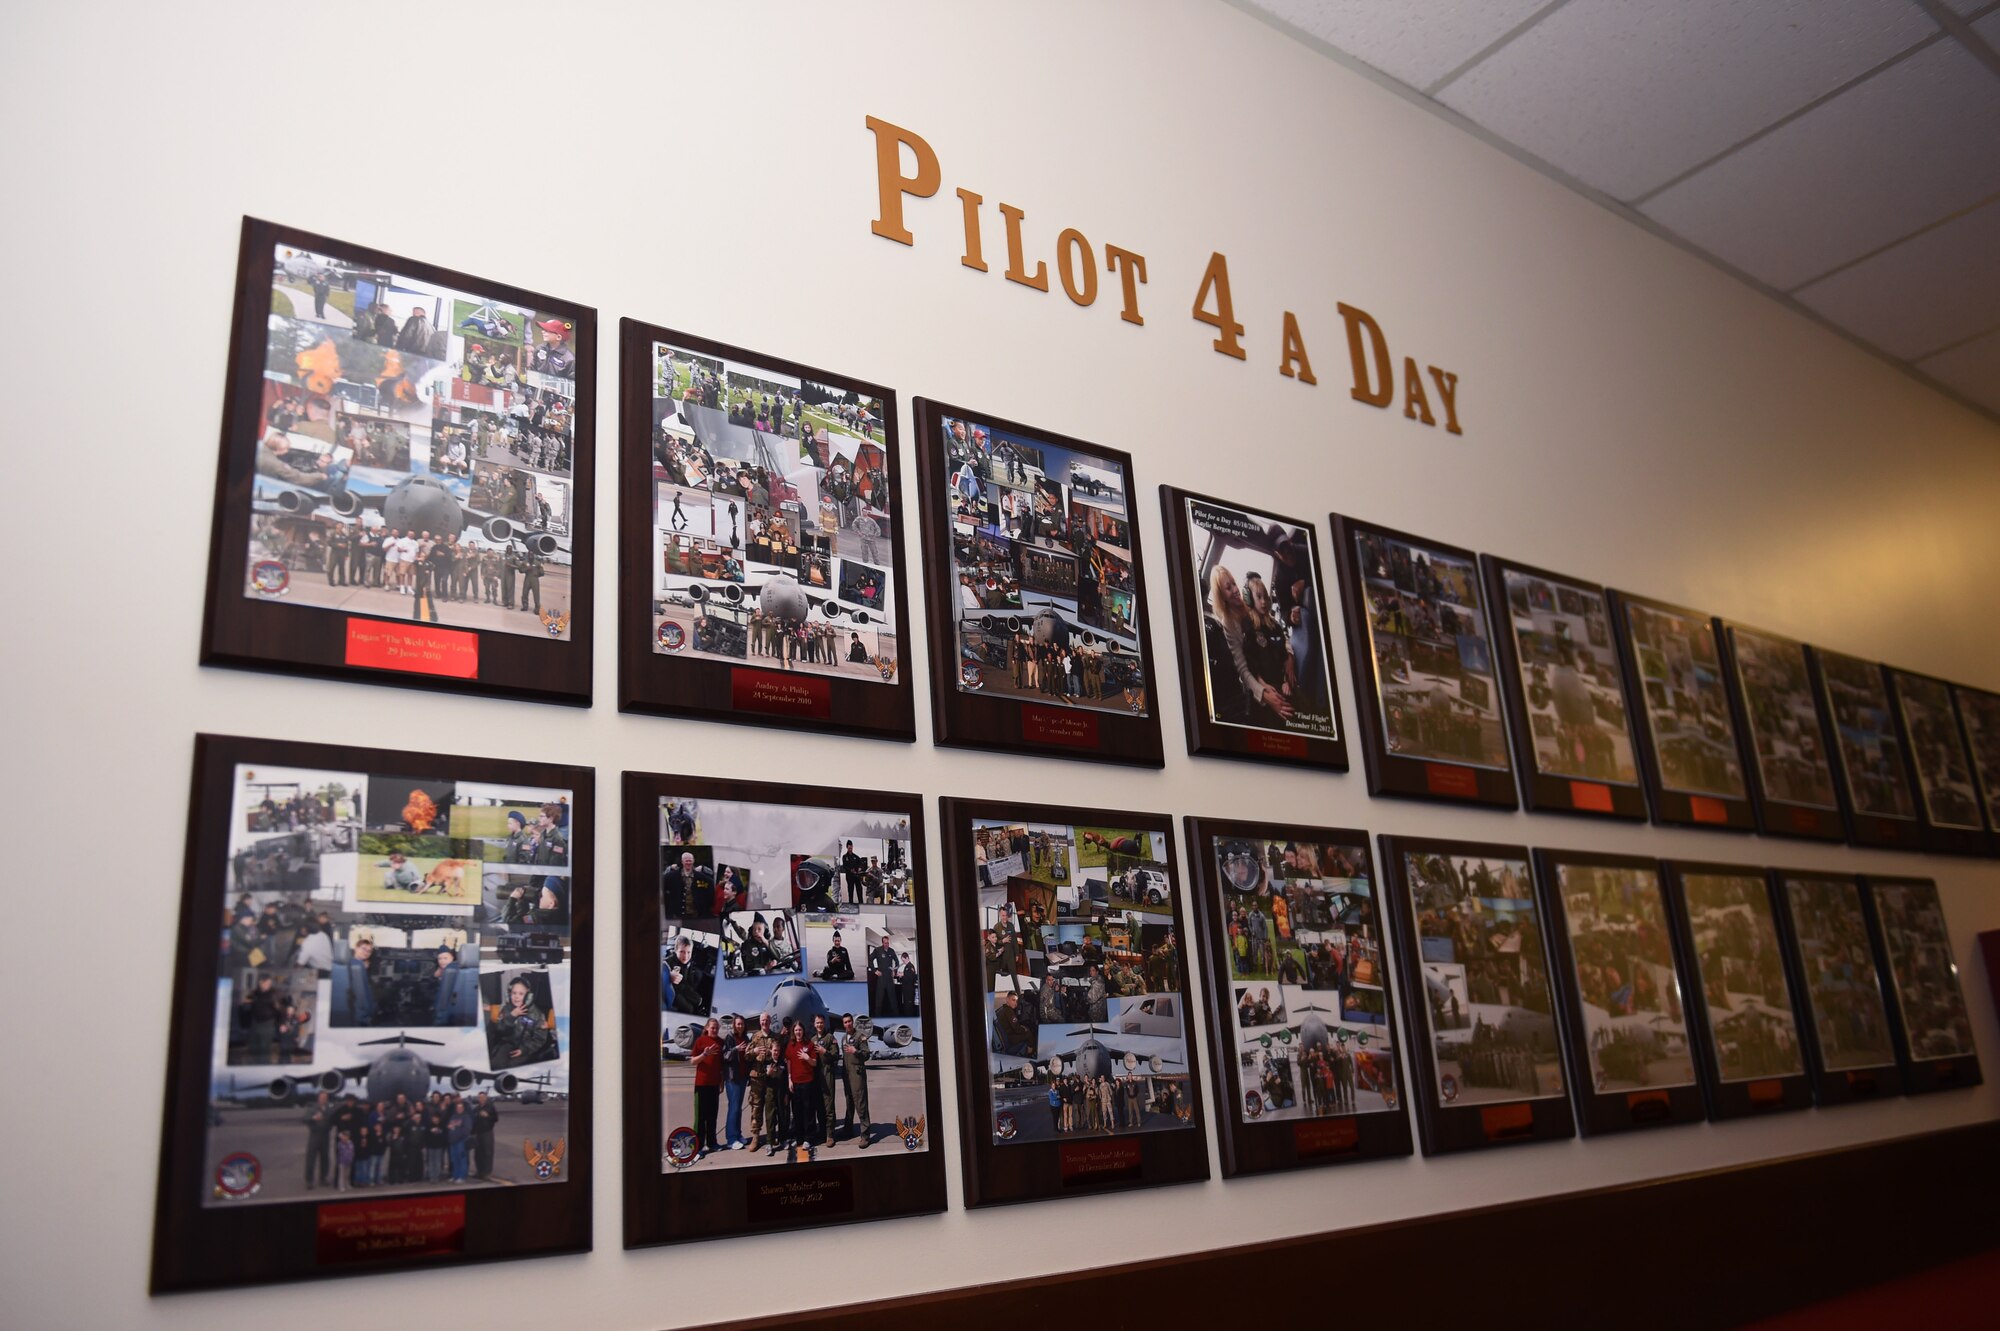 The "Pilot 4 a Day" wall in the 4th Airlift Squadron on Joint Base Lewis-McChord, Wash., displays past Pilot for a day program participants. This wall showcases particpants starting from 2010 when the program was revamped by the Air Force Association and the 4th Airlift Squadron.